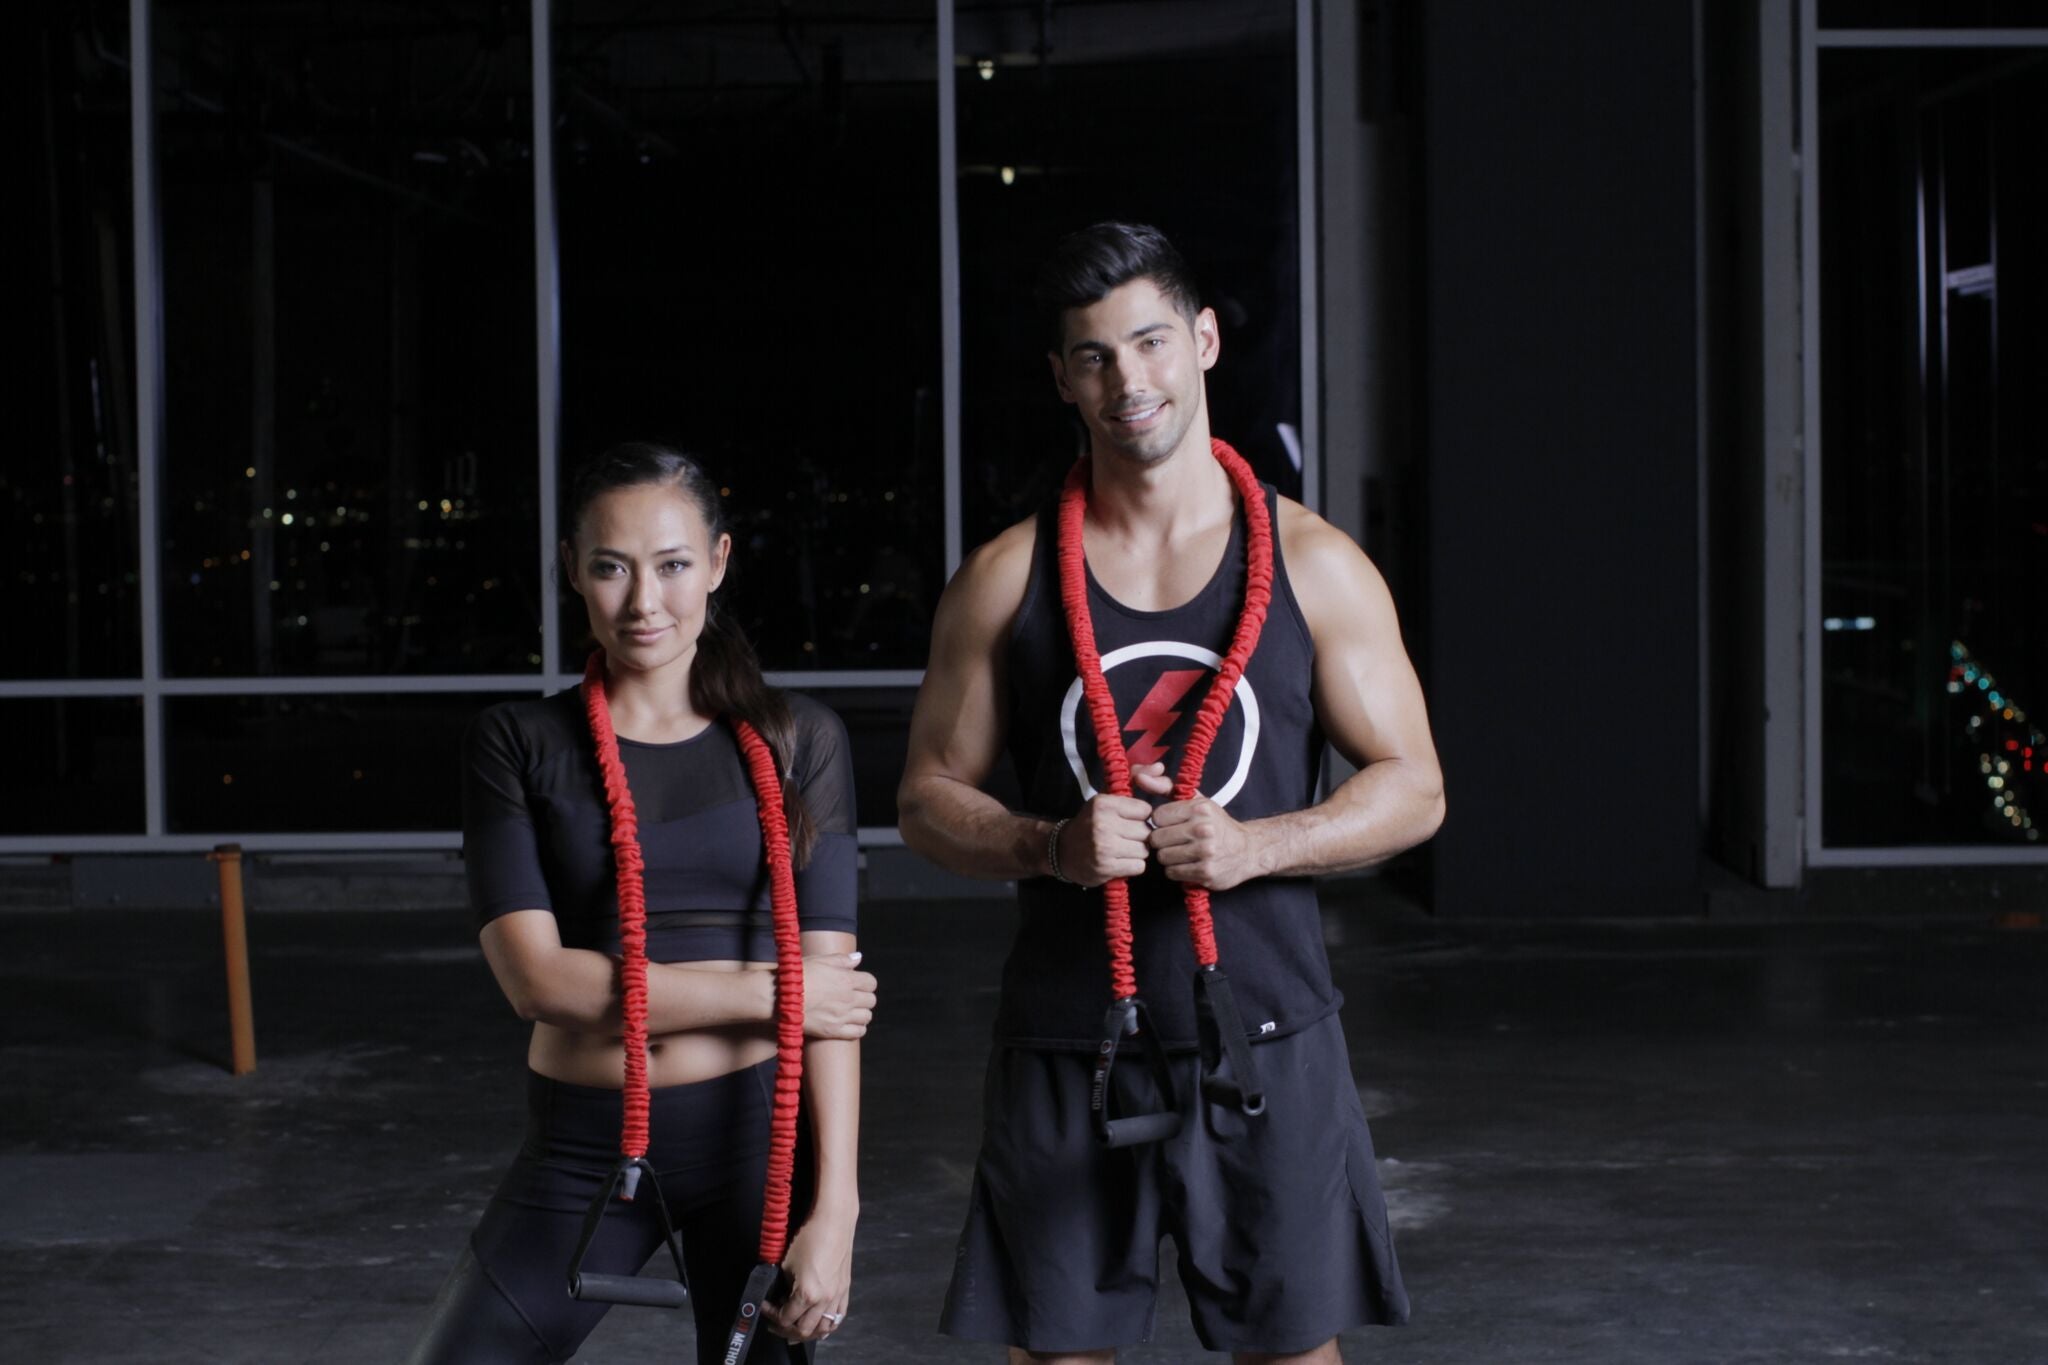 12 Benefits of Resistance Bands & How To Use Them